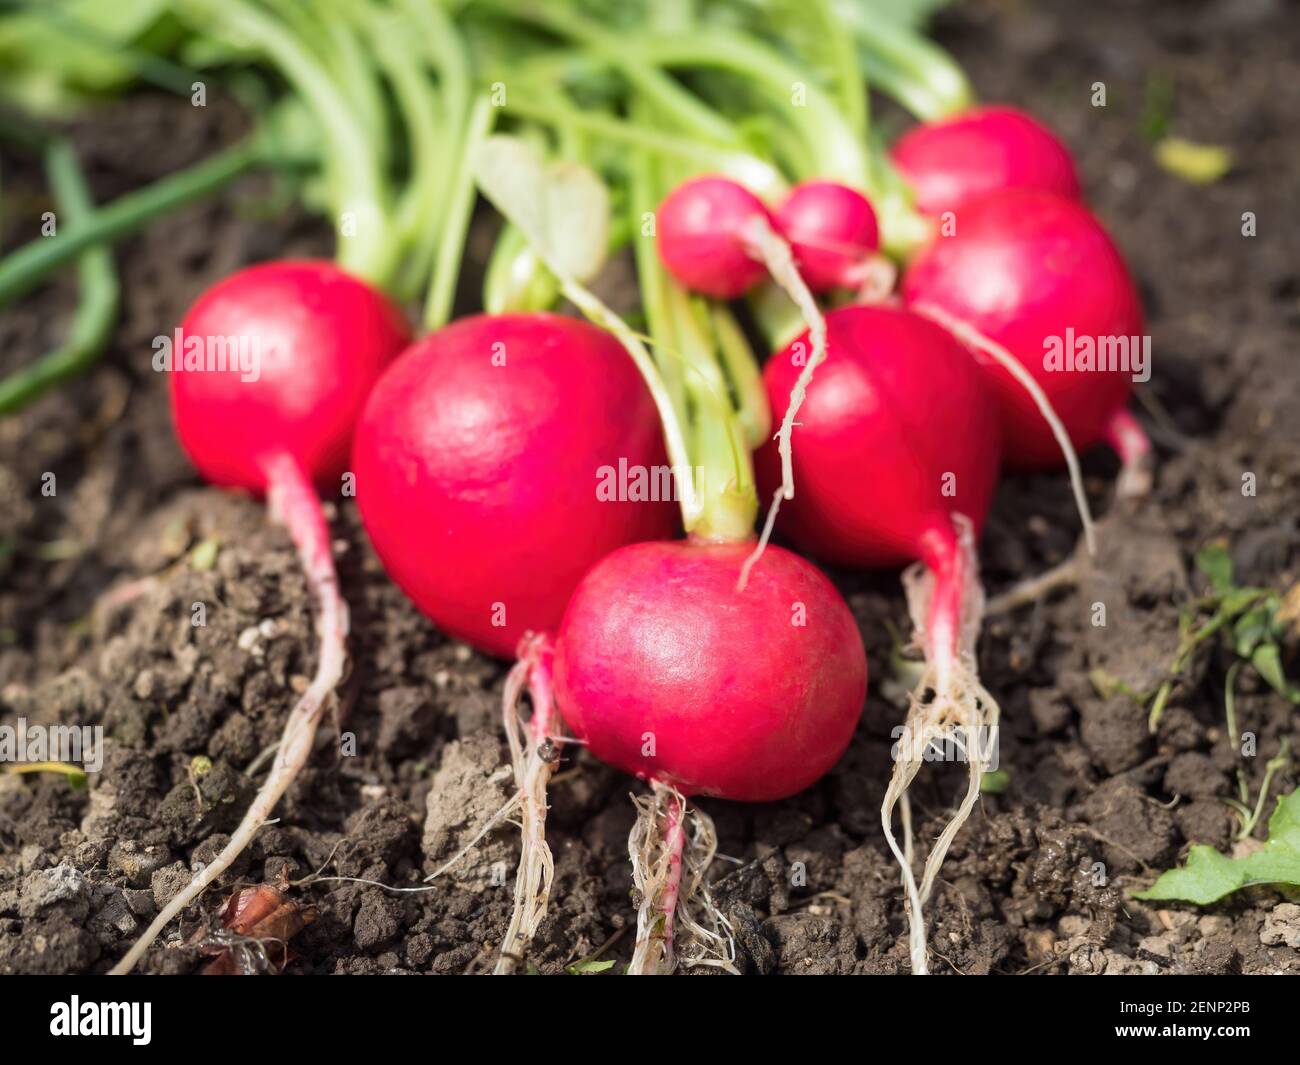 Beeds stock image. Image of nature, healthy, cook, brown - 44477989